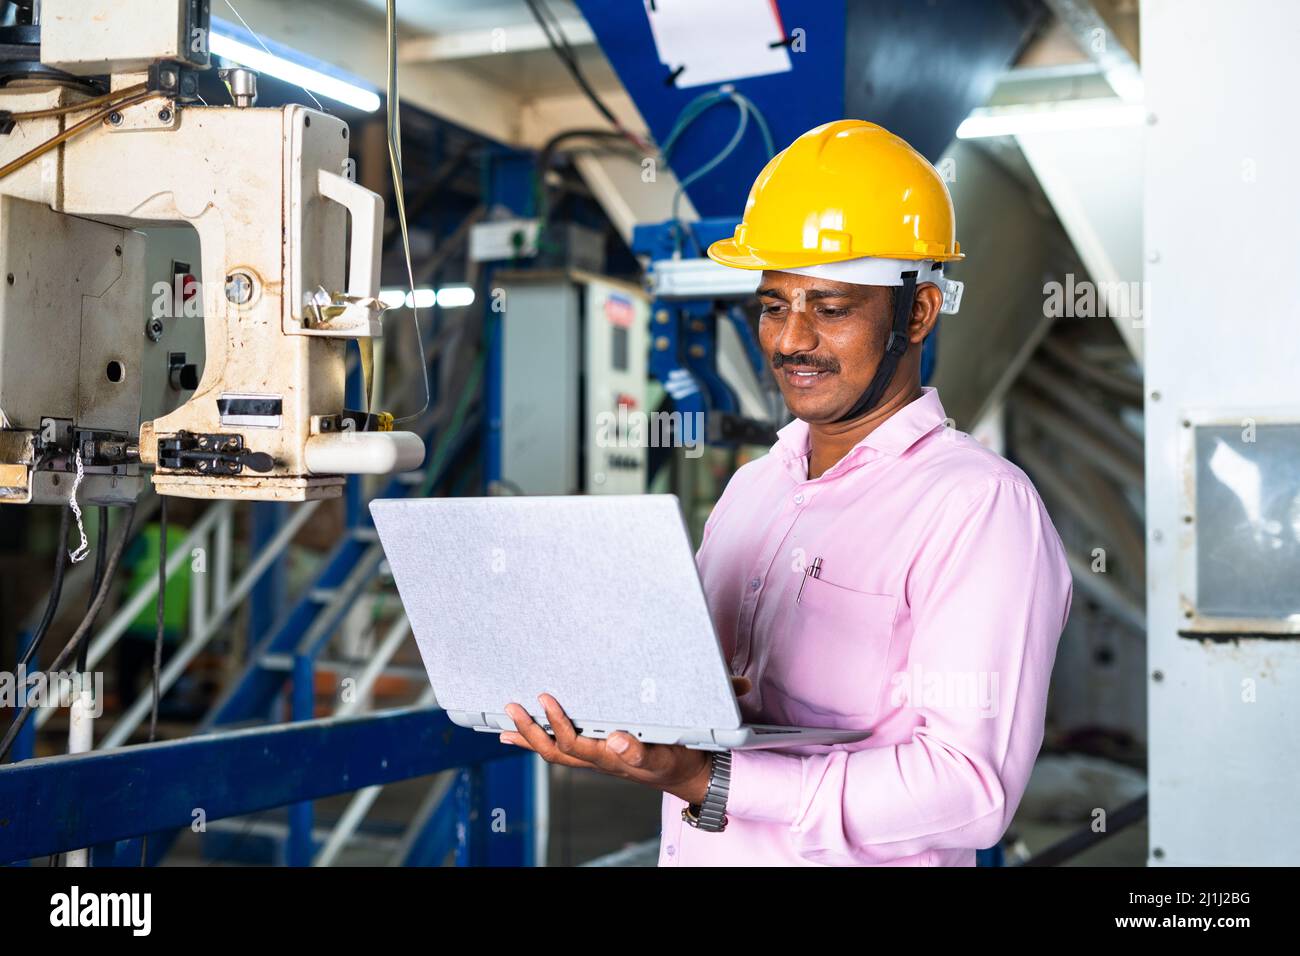 engineer in uniform busy working on laptop at machinery in factory - concept of technology, skilled or professional labour and development. Stock Photo